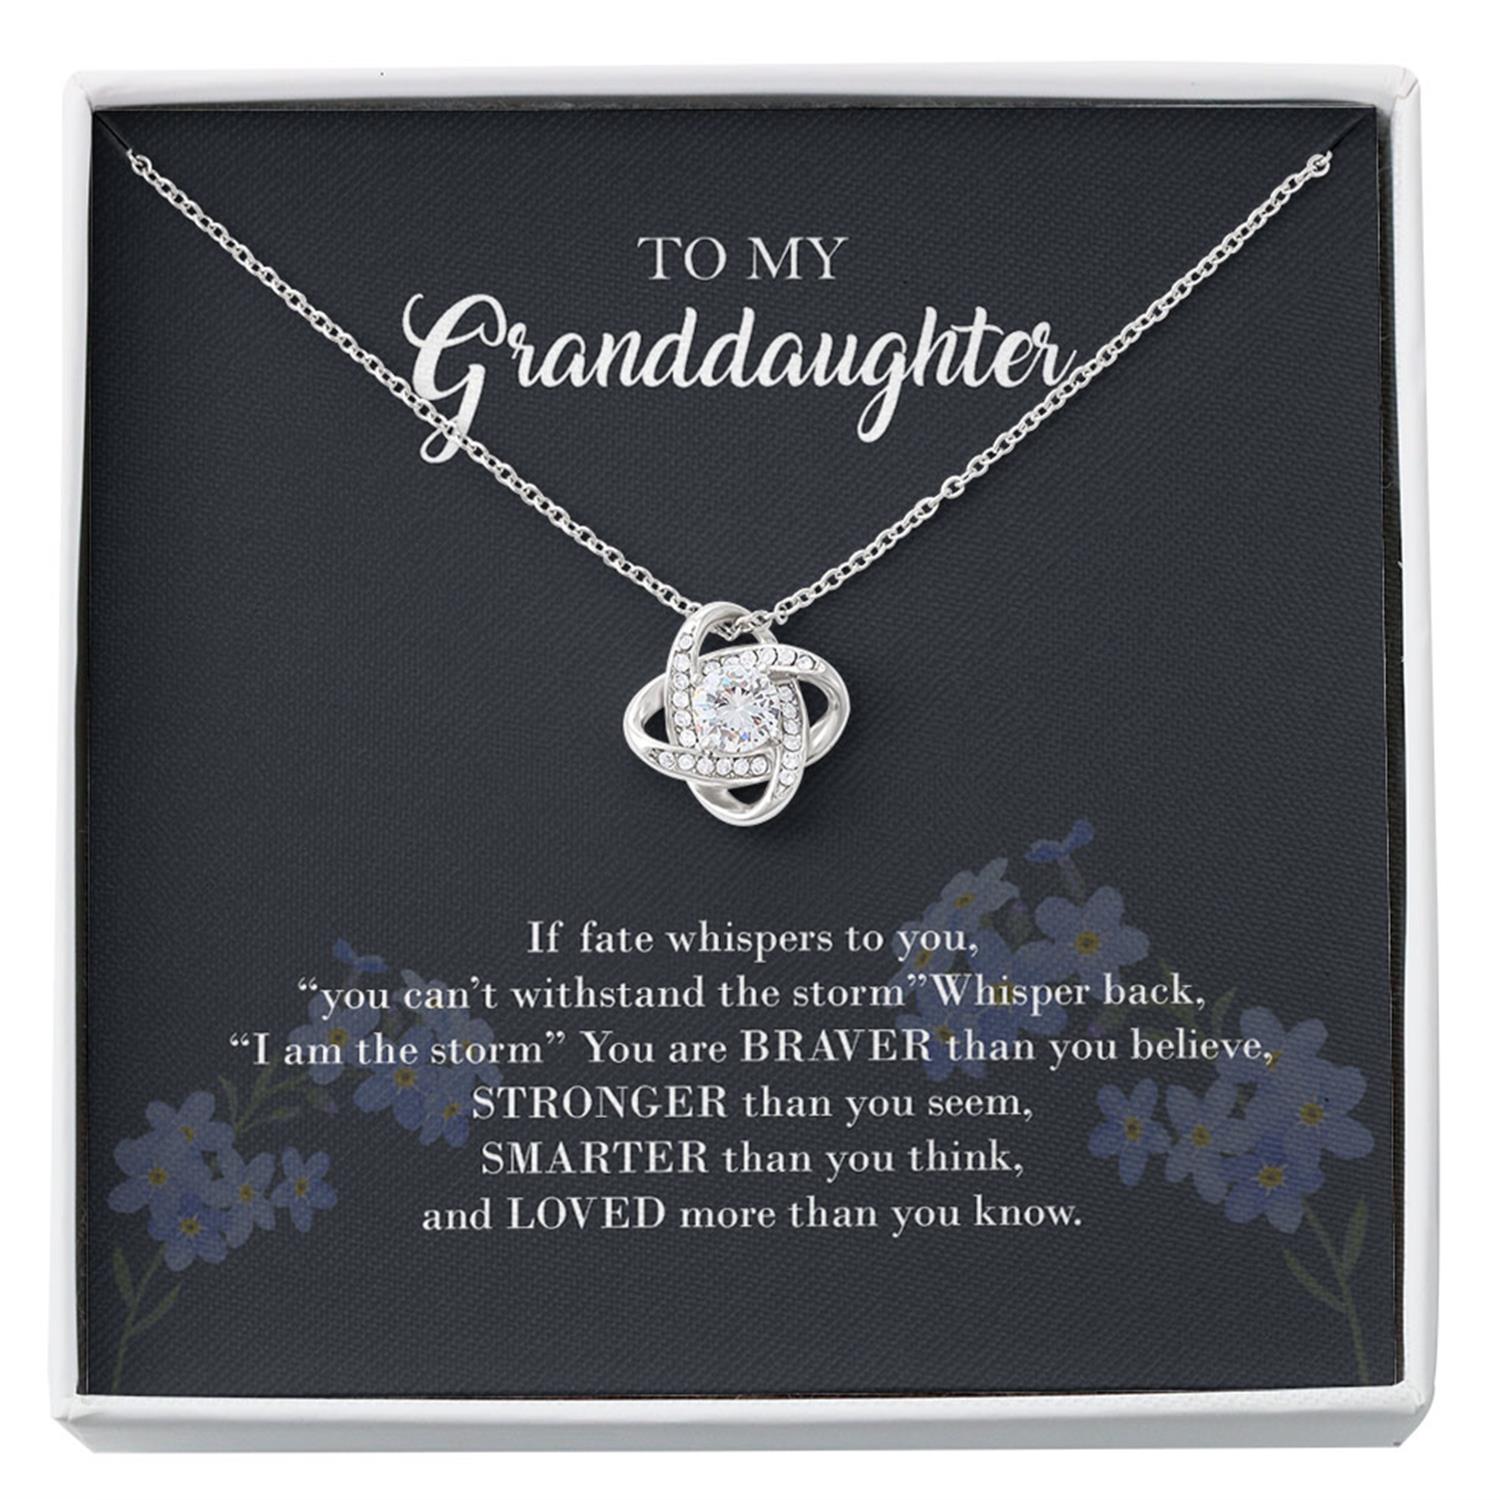 Granddaughter Necklace Gifts From Grandma, Granddaughter Gifts Custom Necklace